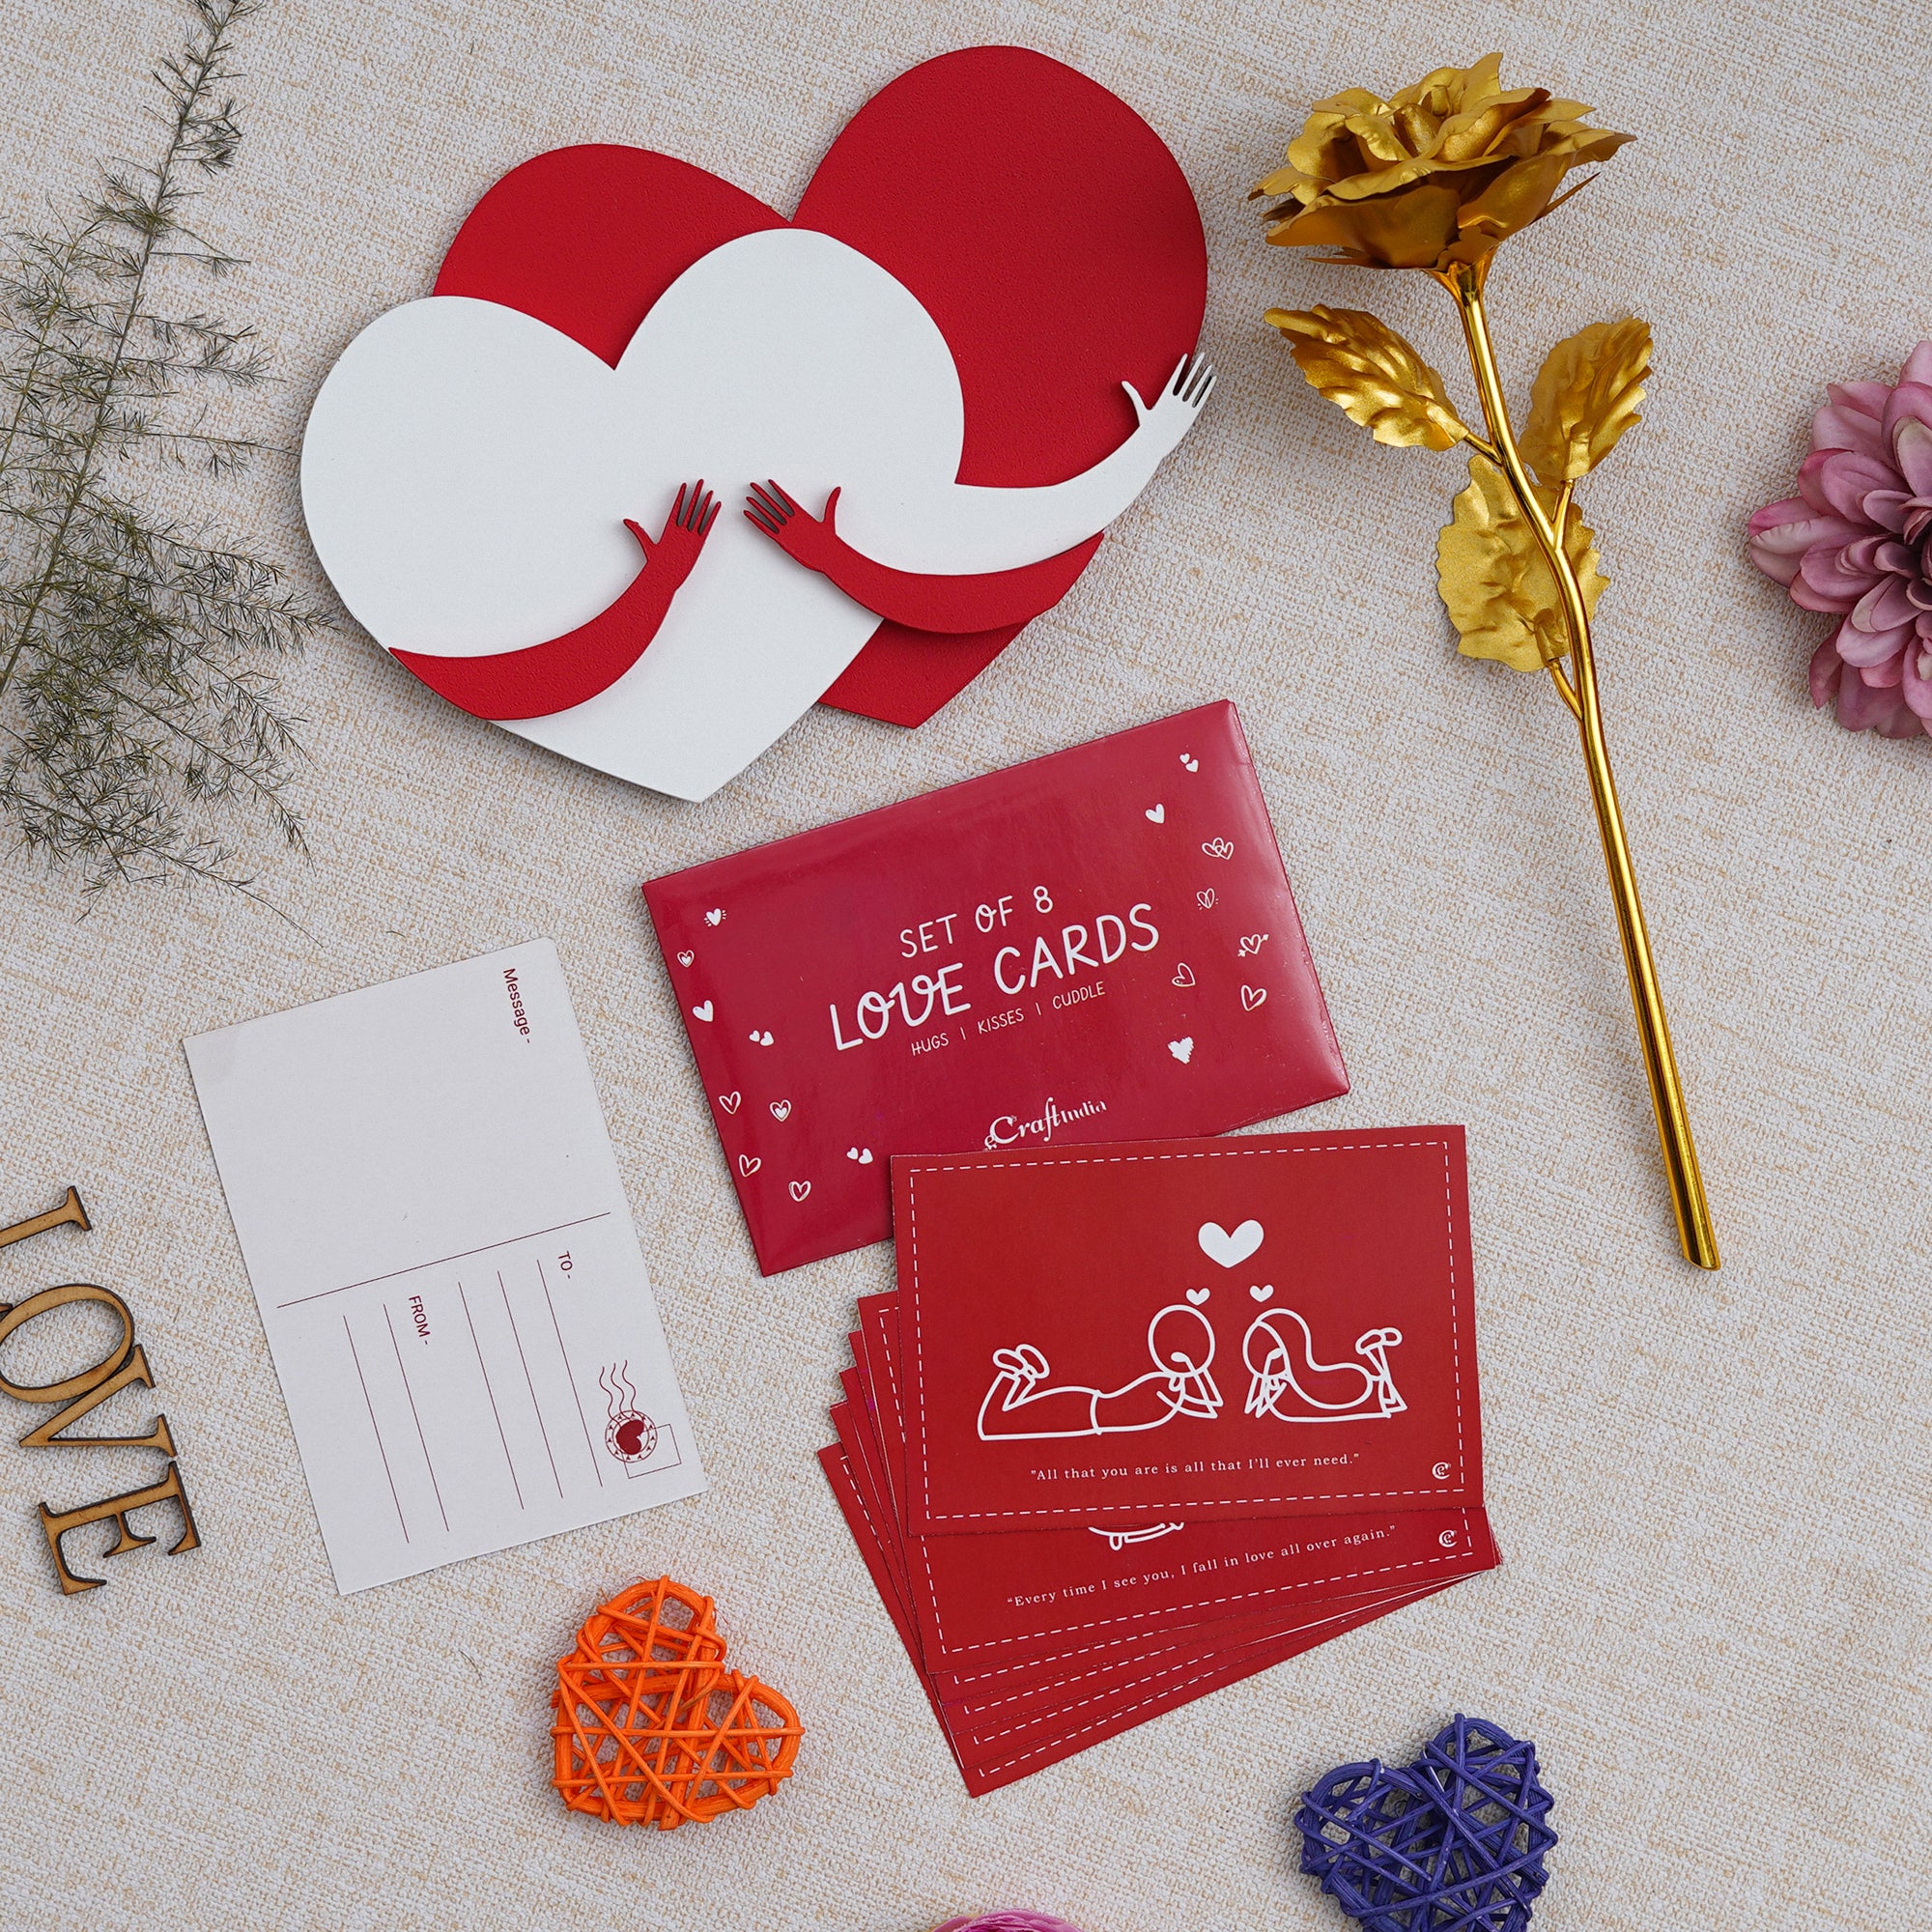 Valentine Combo of Pack of 8 Love Gift Cards, Golden Rose Gift Set, Red and White Heart Hugging Each Other Gift Set